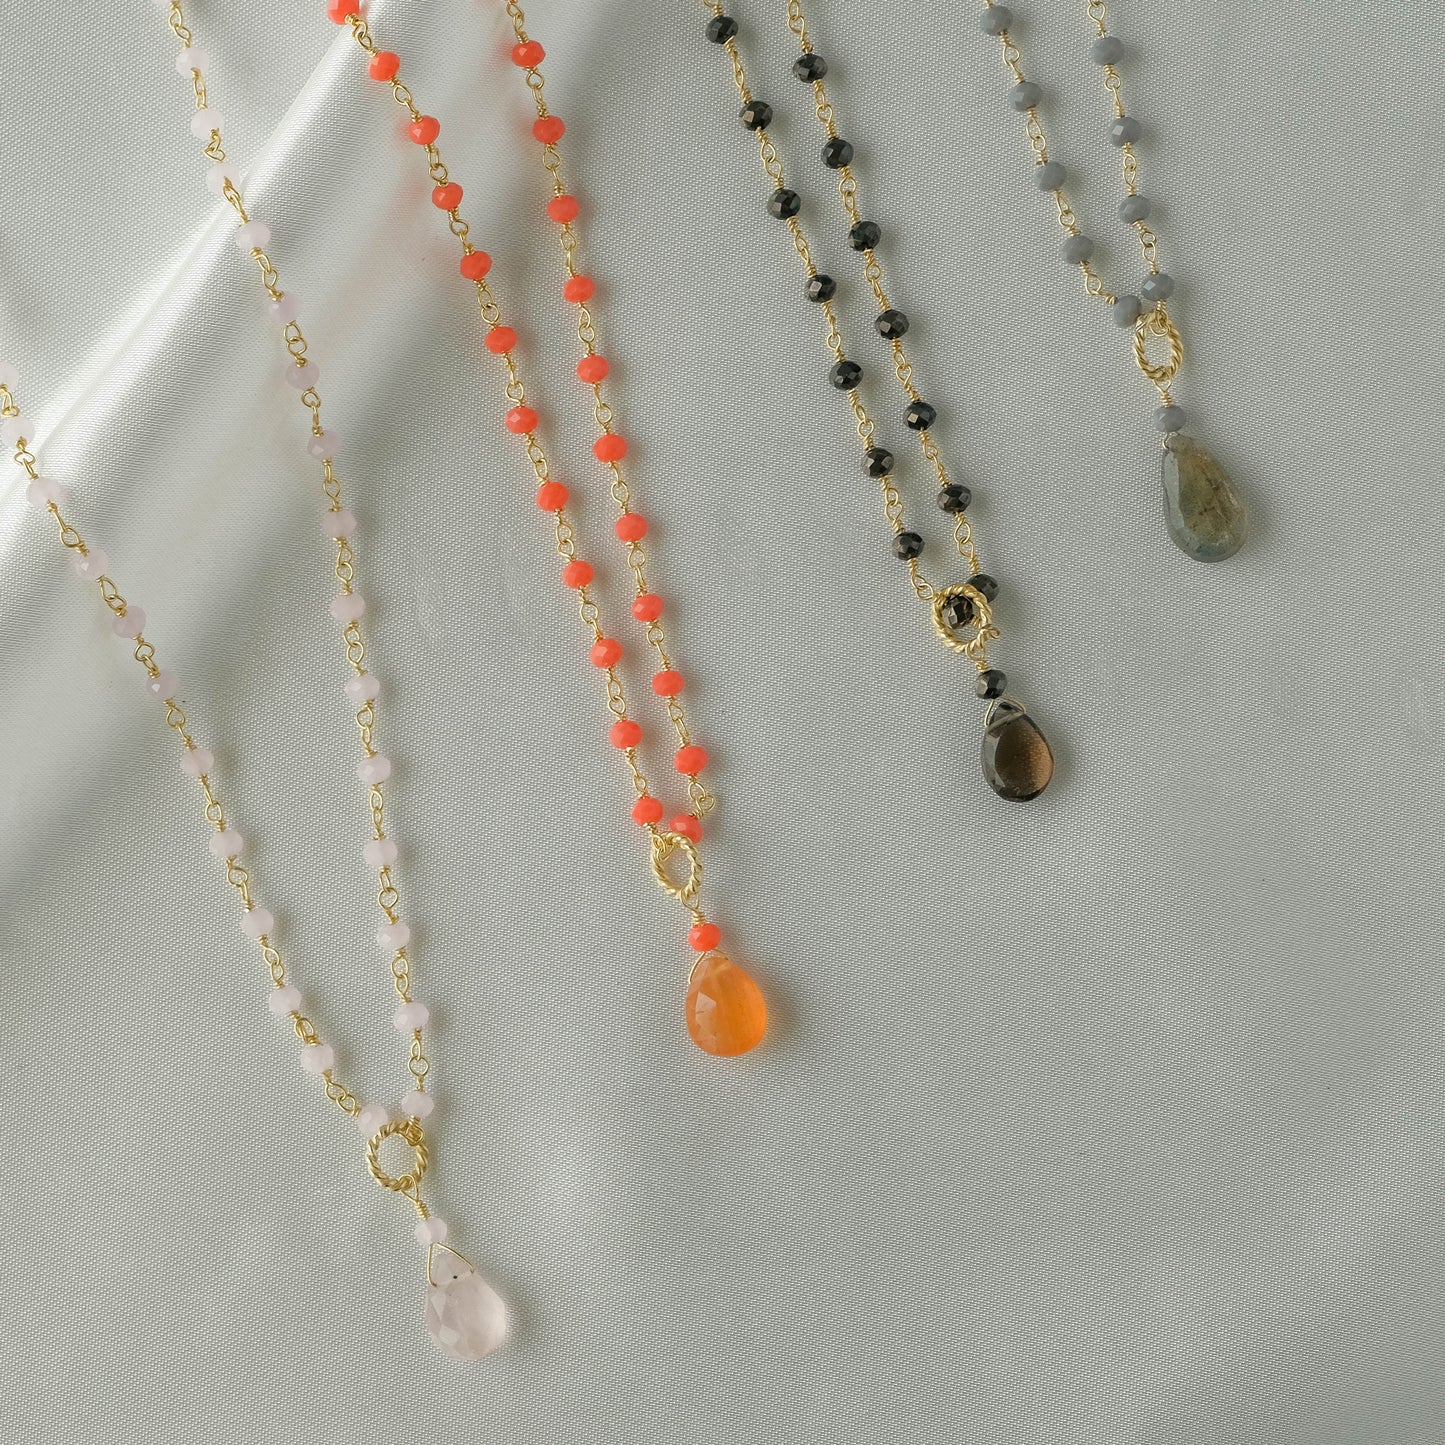 Natural stone and beads 2WAY long necklace